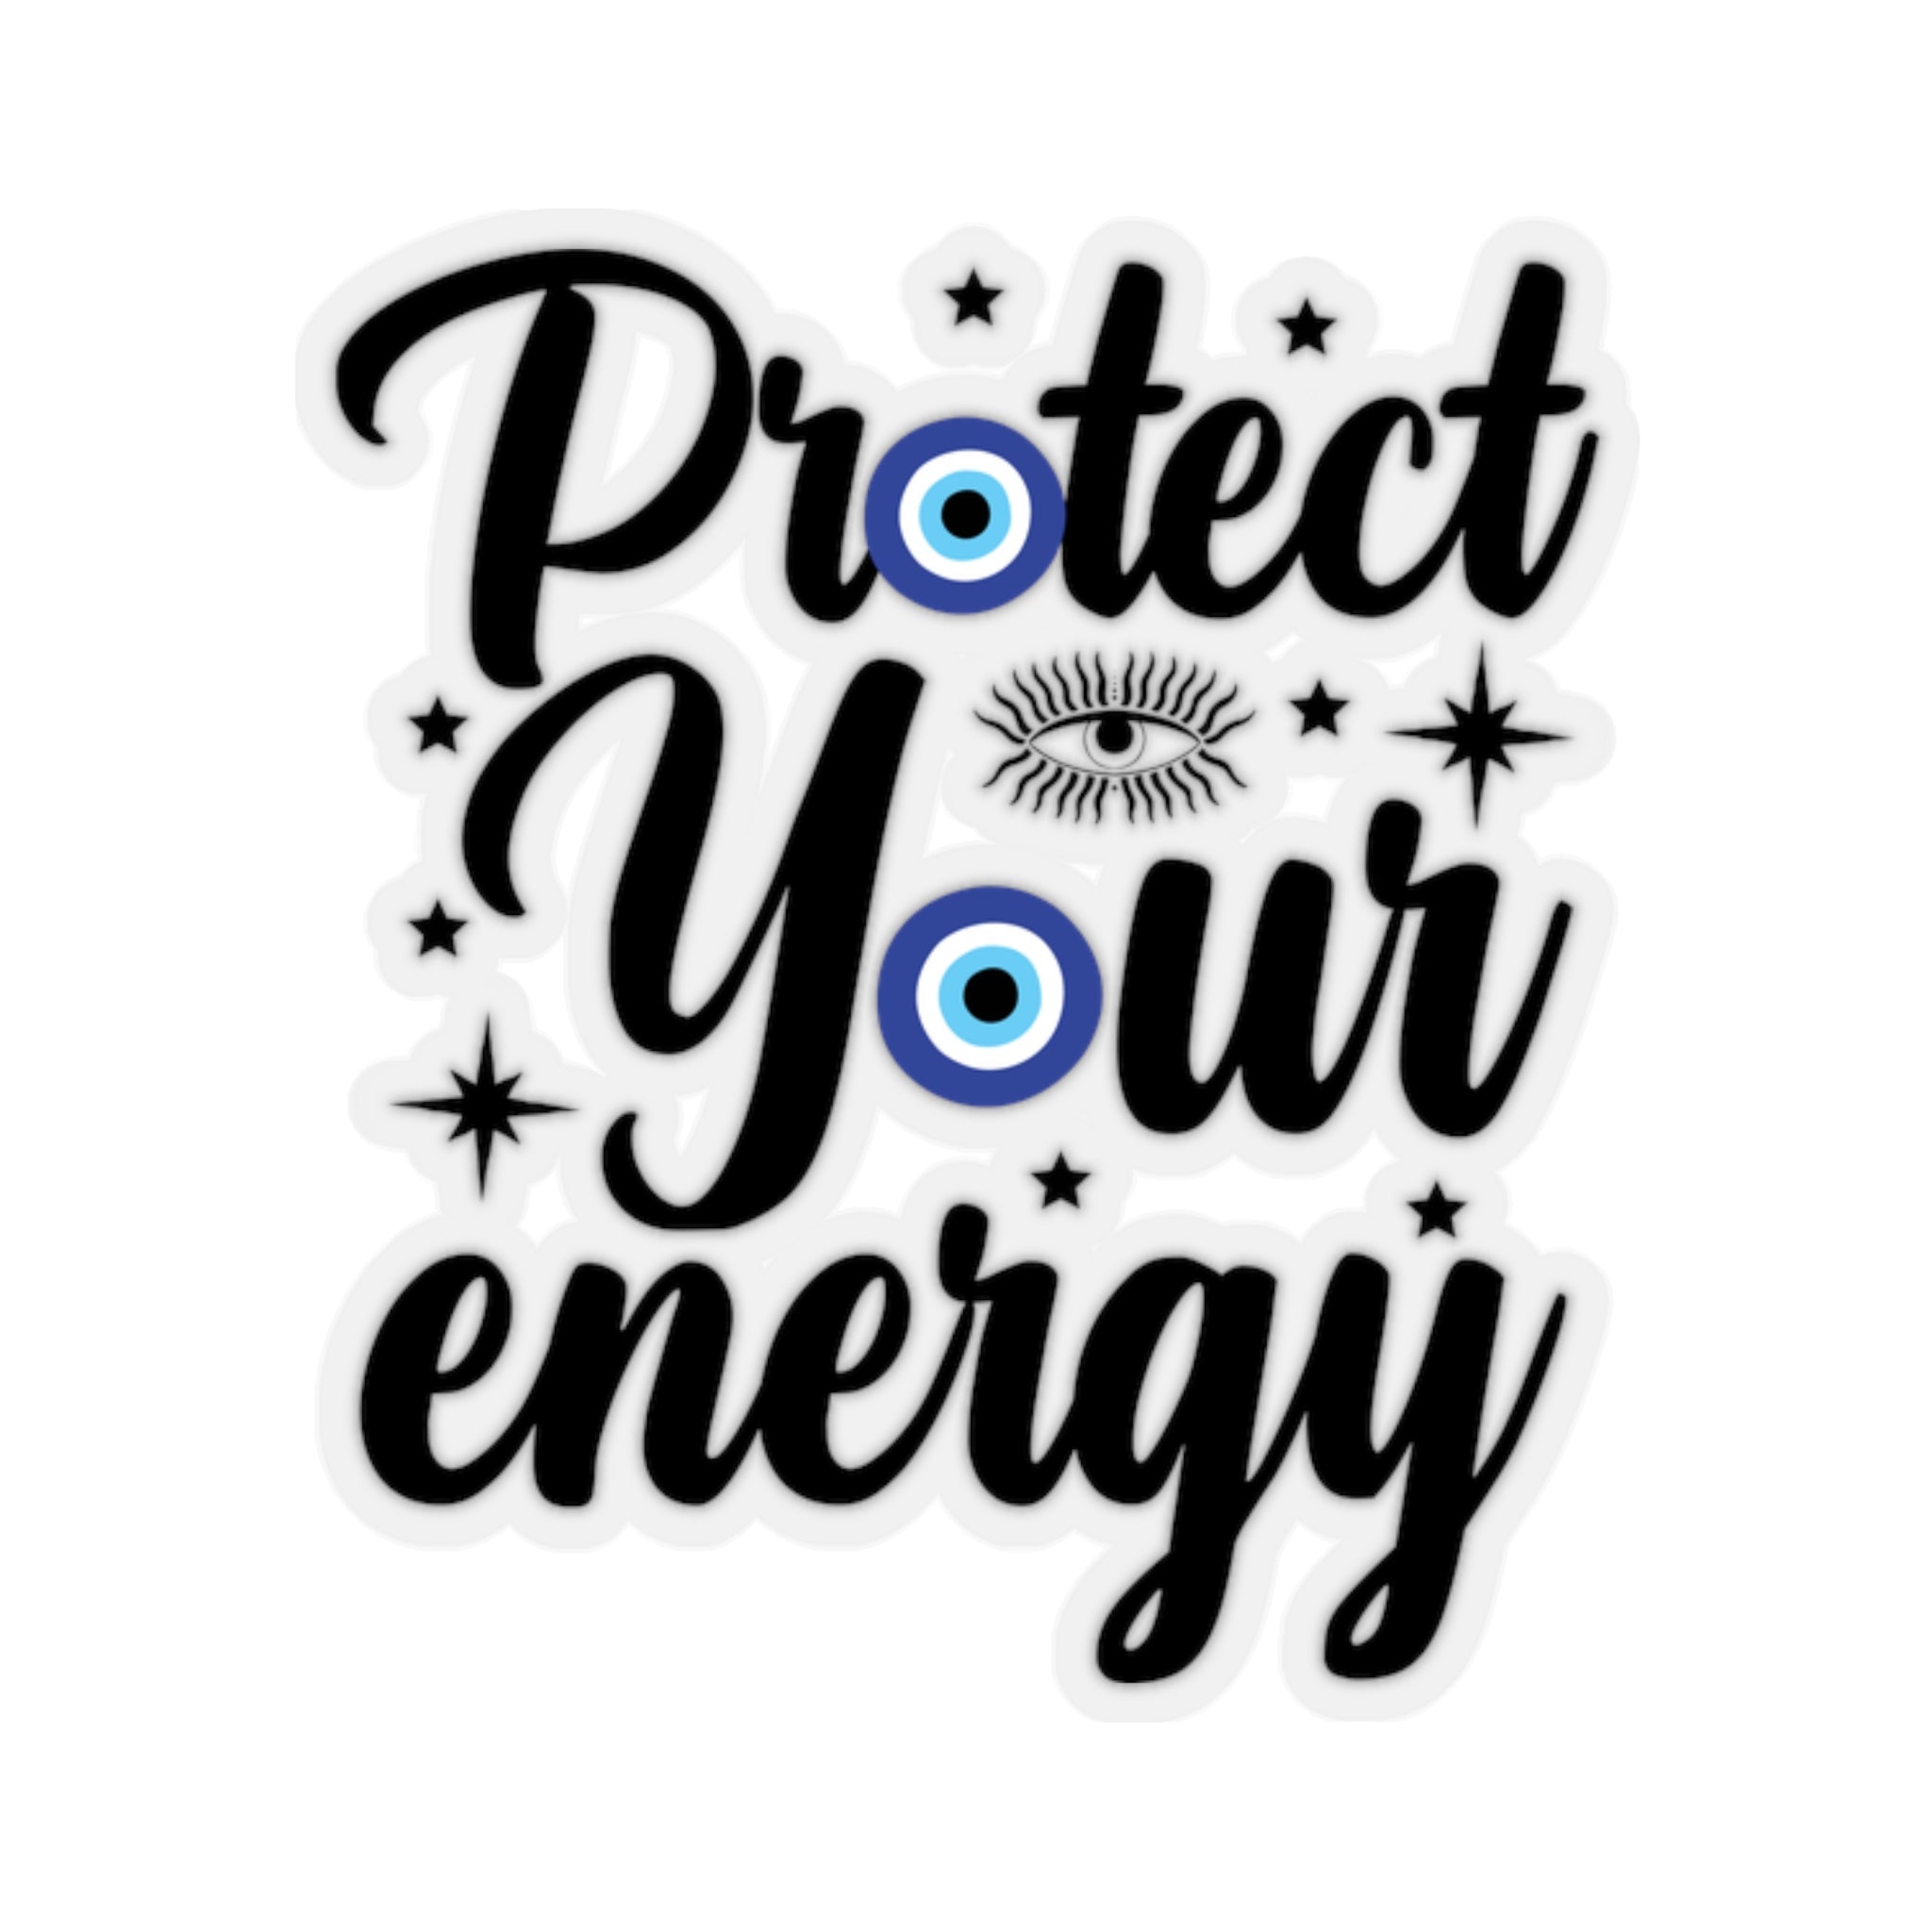 Protect your energy kiss-cut sticker